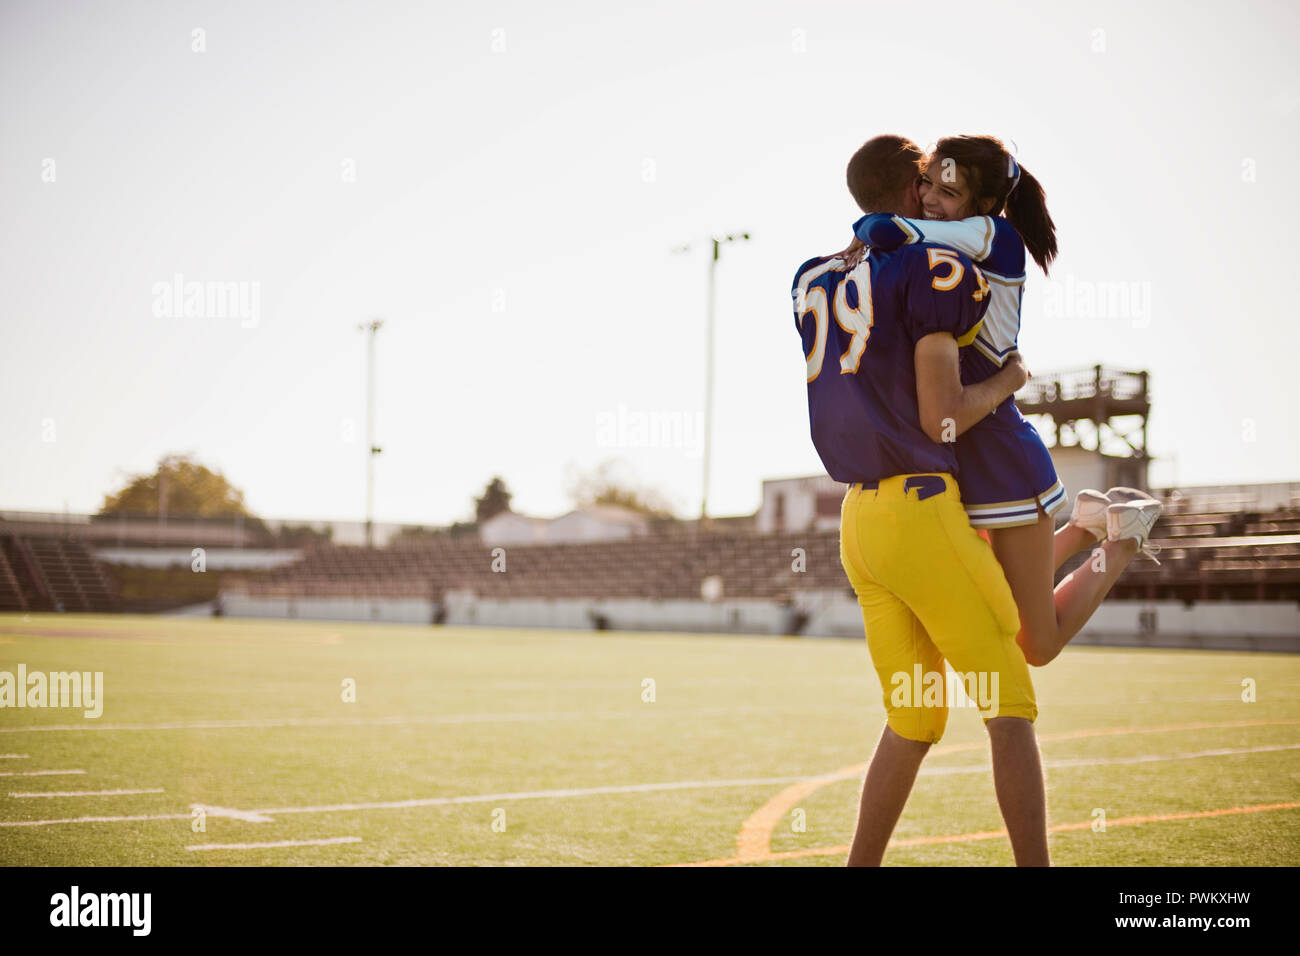 Football player picking up cheerleader in a lover's embrace. Stock Photo